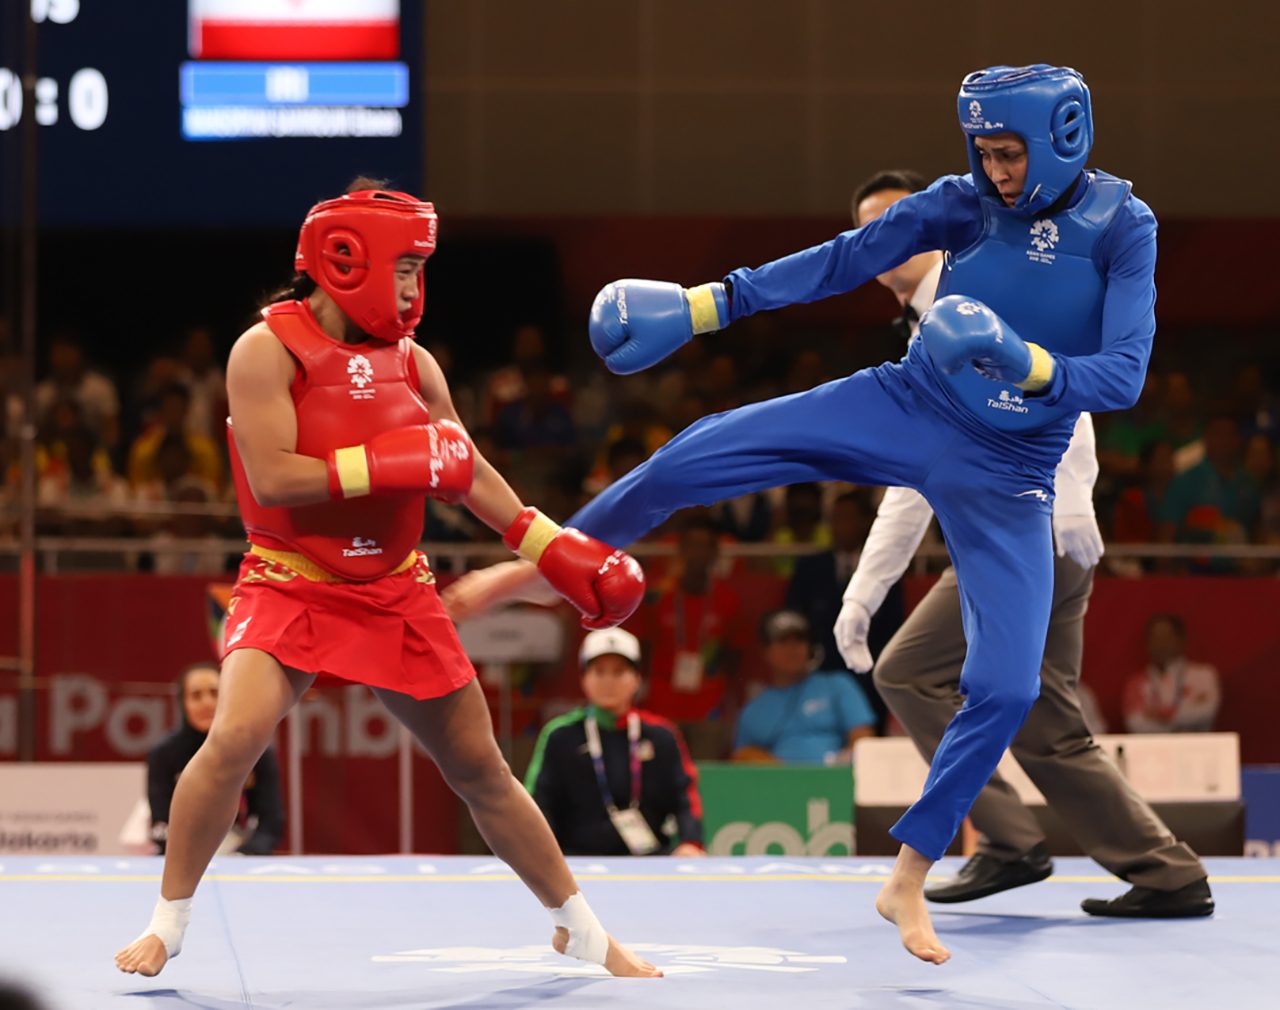 PH wushu wraps up SEA Games 2019 with 7 golds